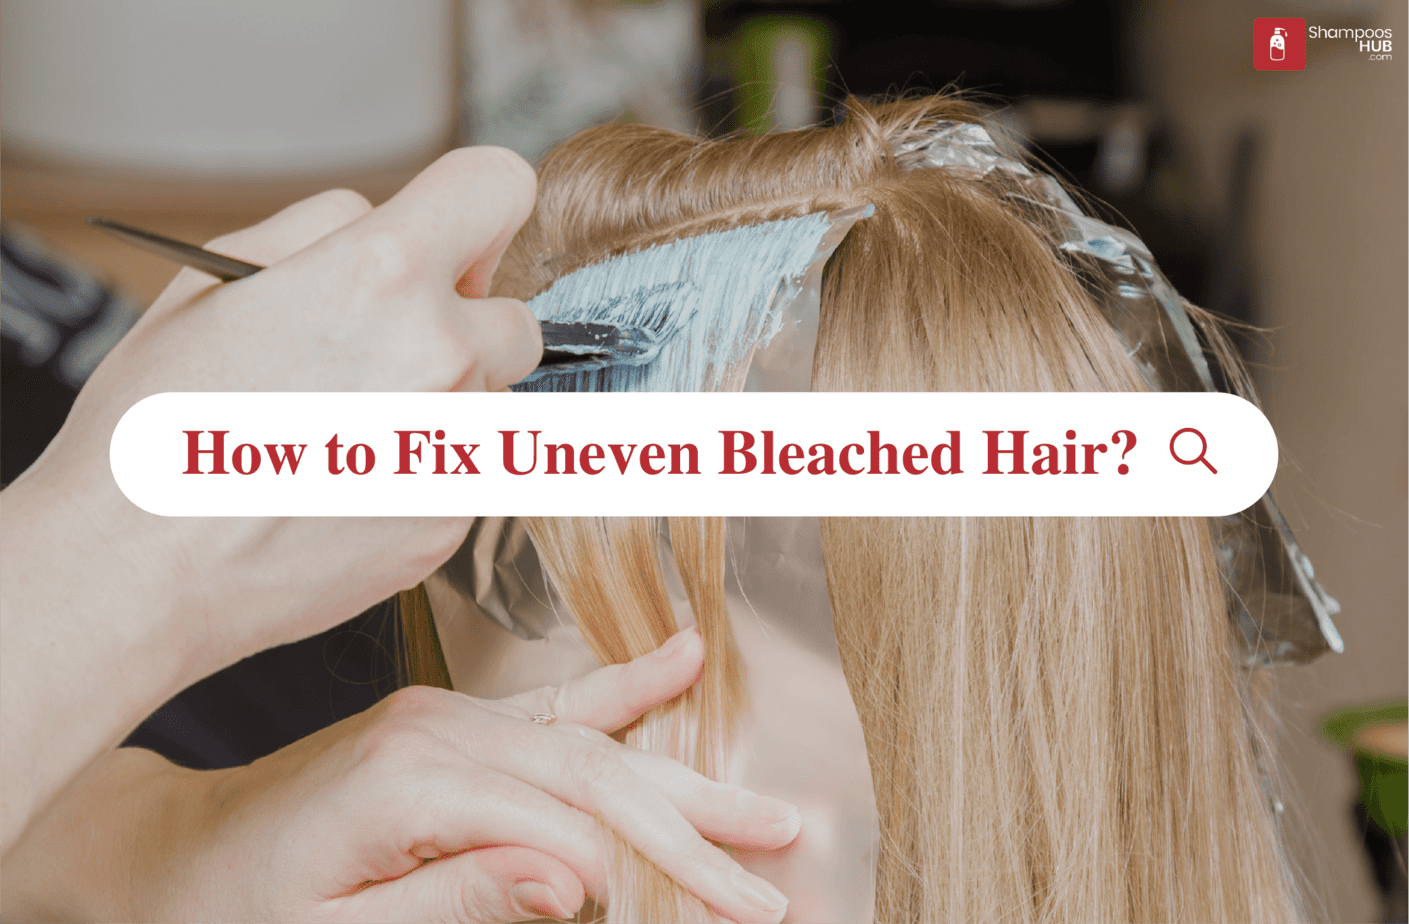 How to Fix Uneven Bleached Hair?